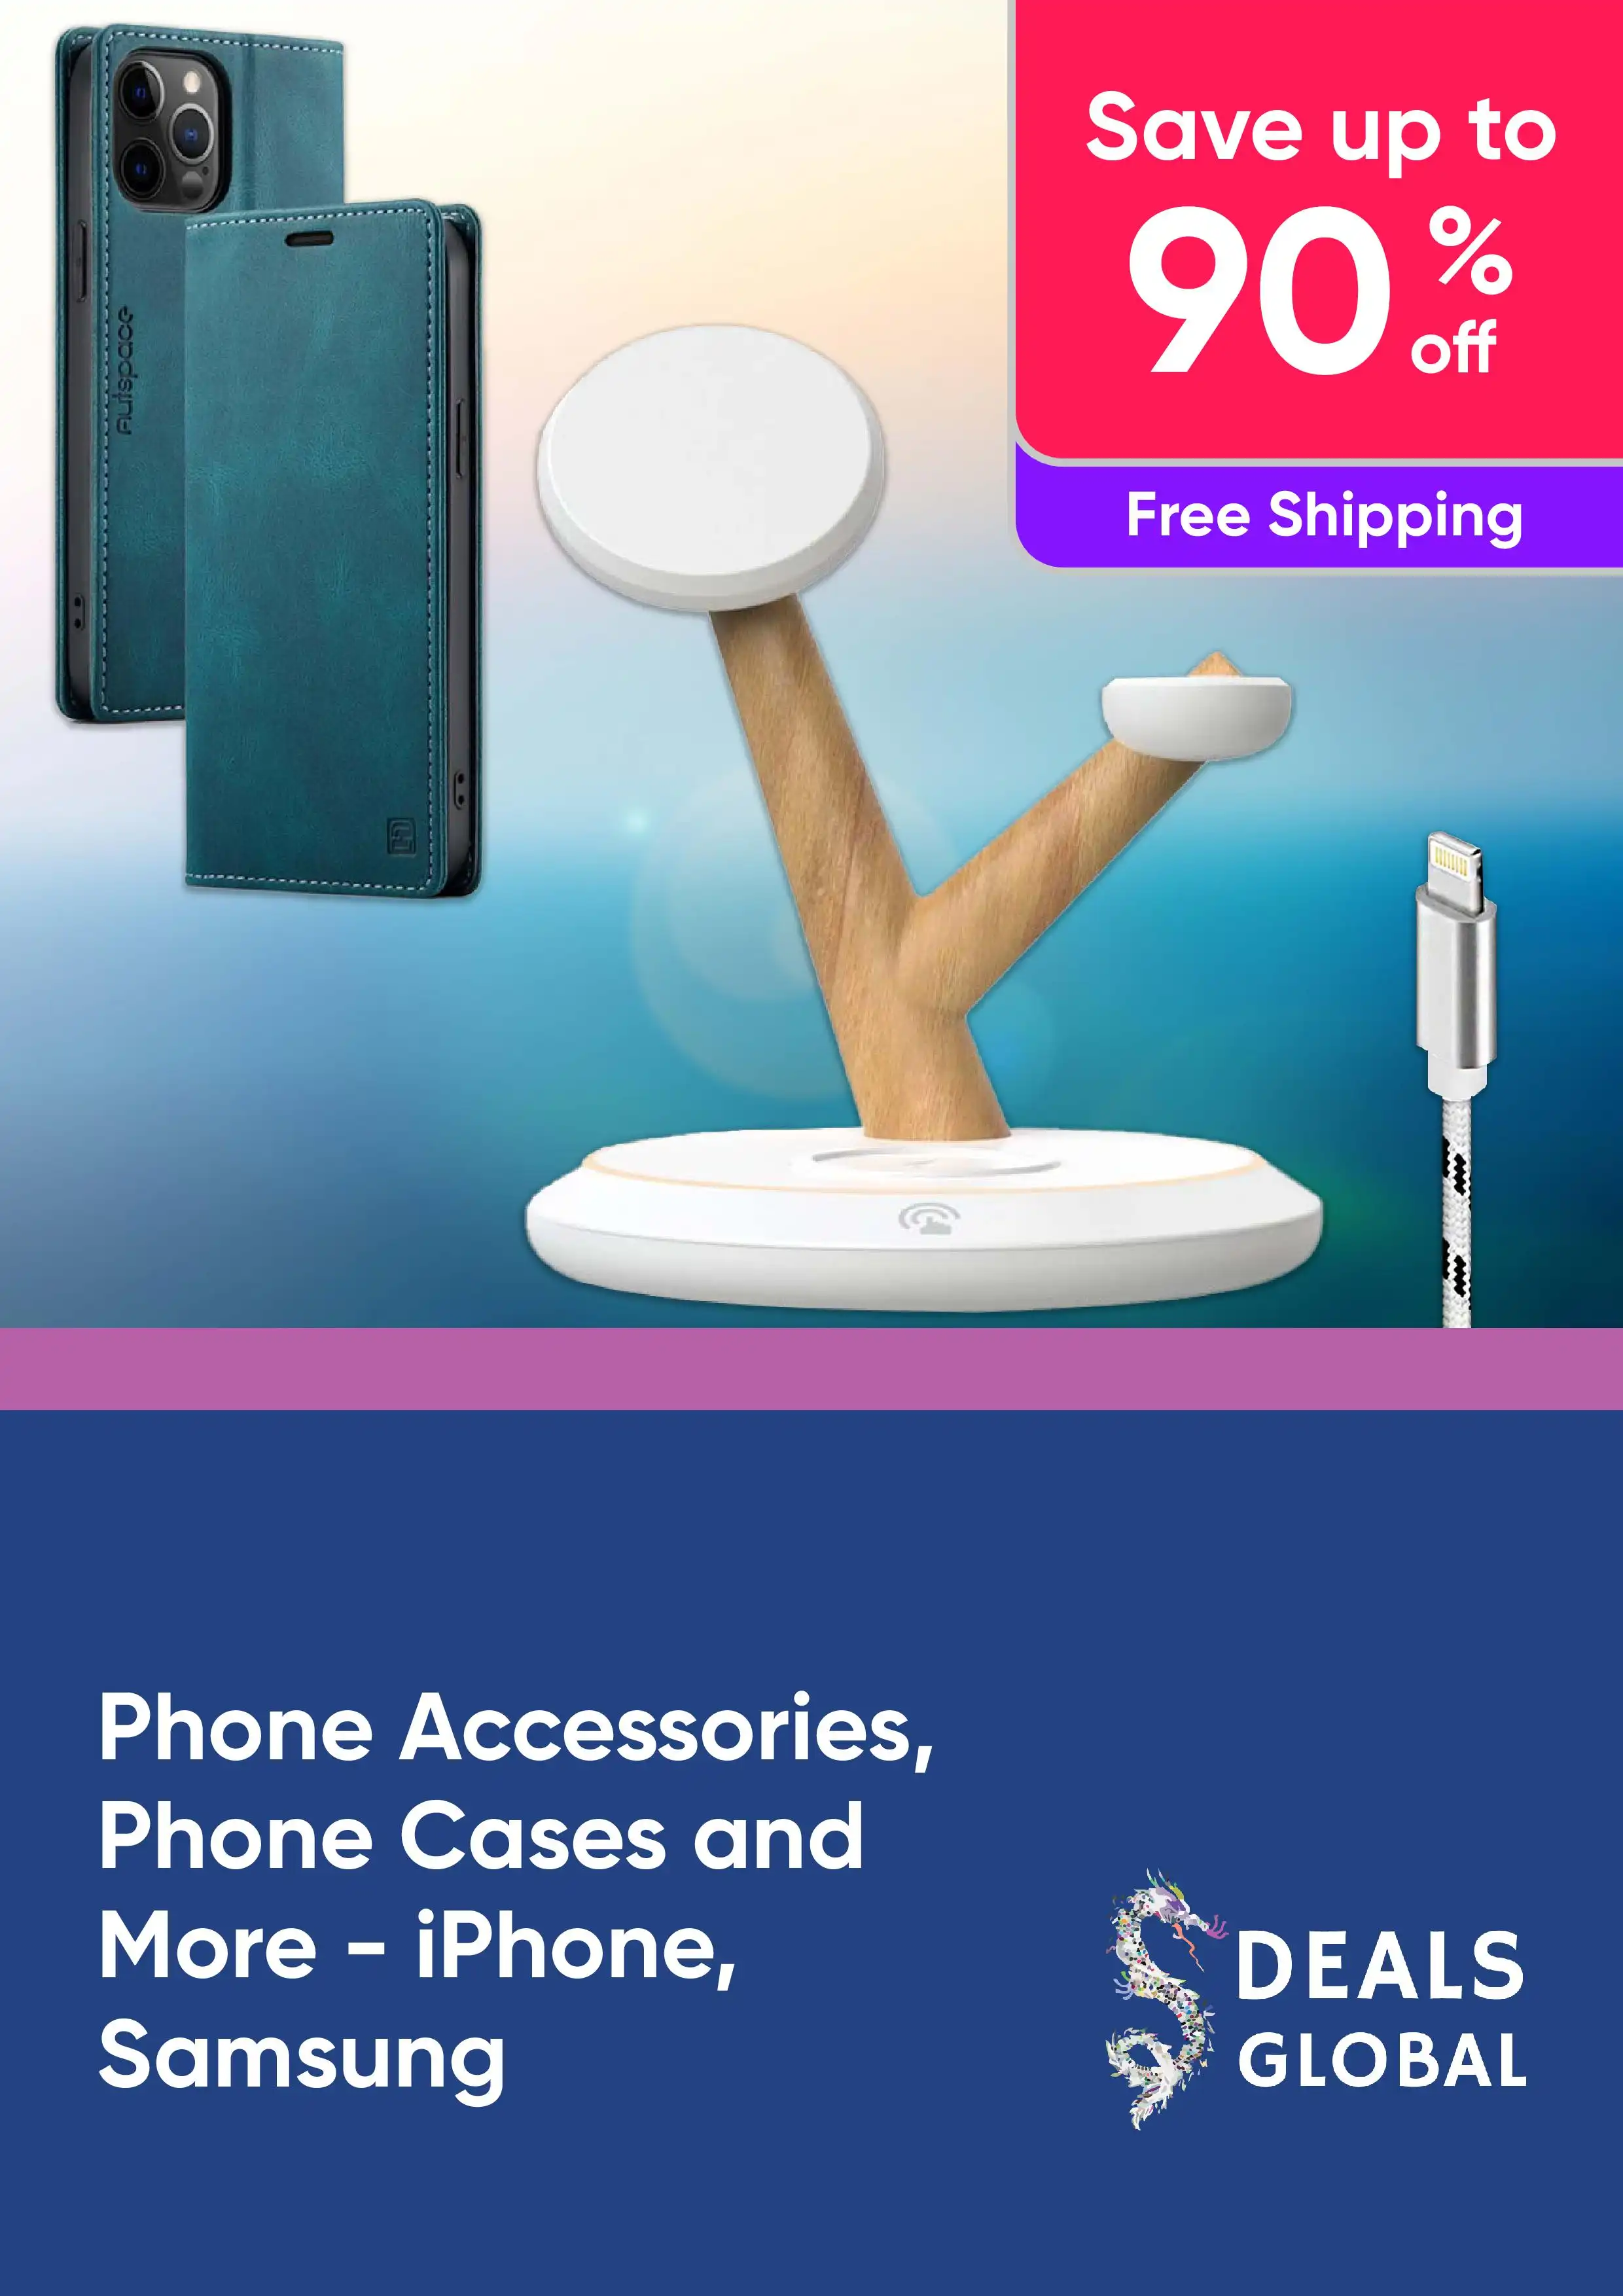 Save Up to 90% Off Phone Accessories, Phone Cases and More - iPhone, Samsung